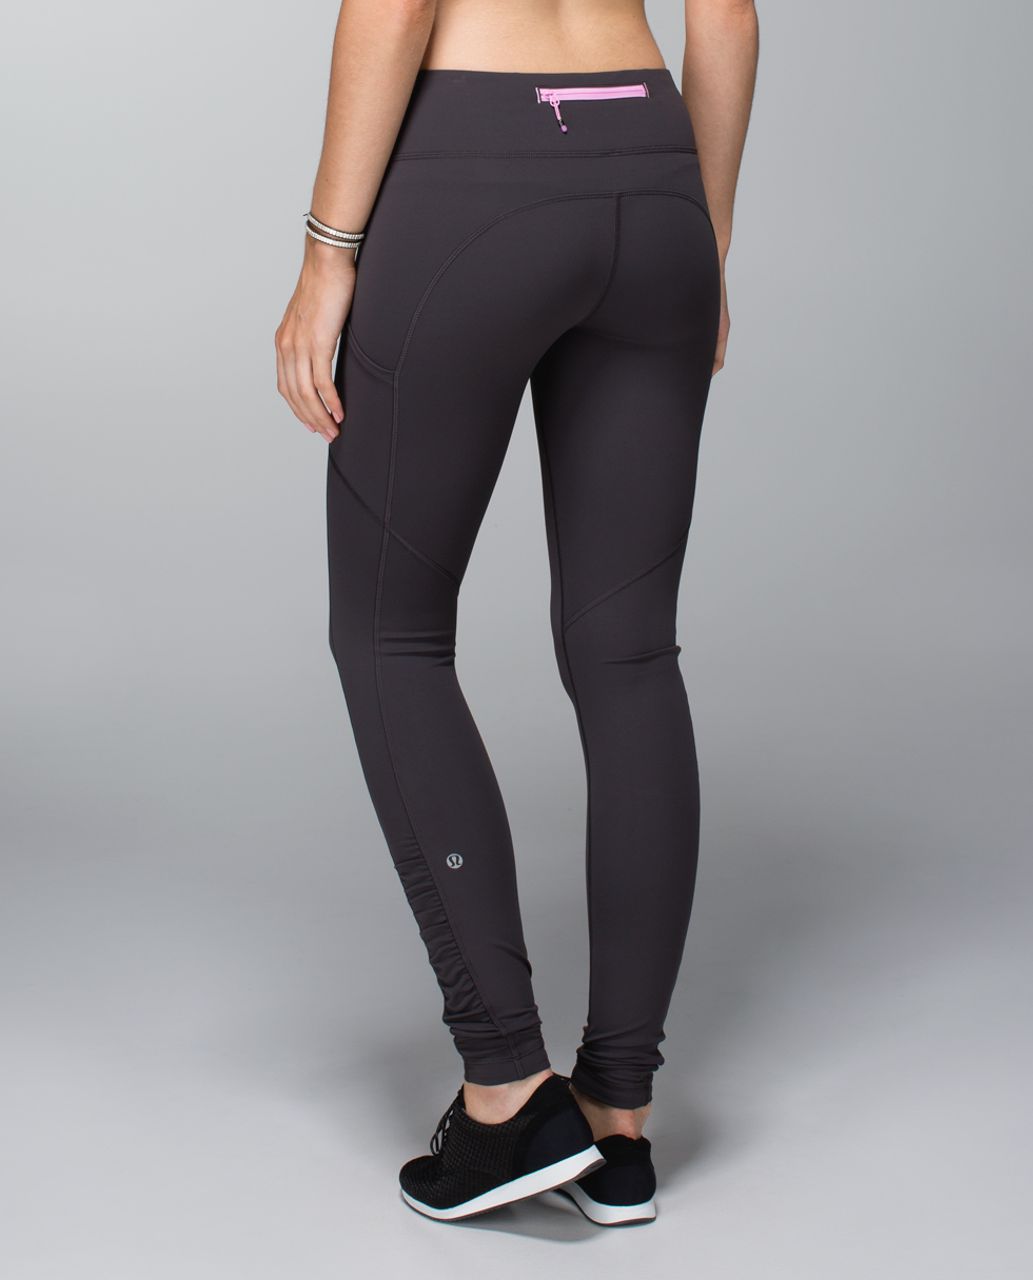 Lululemon Speed Up Tight *Full-On Luxtreme 28 - Black (First